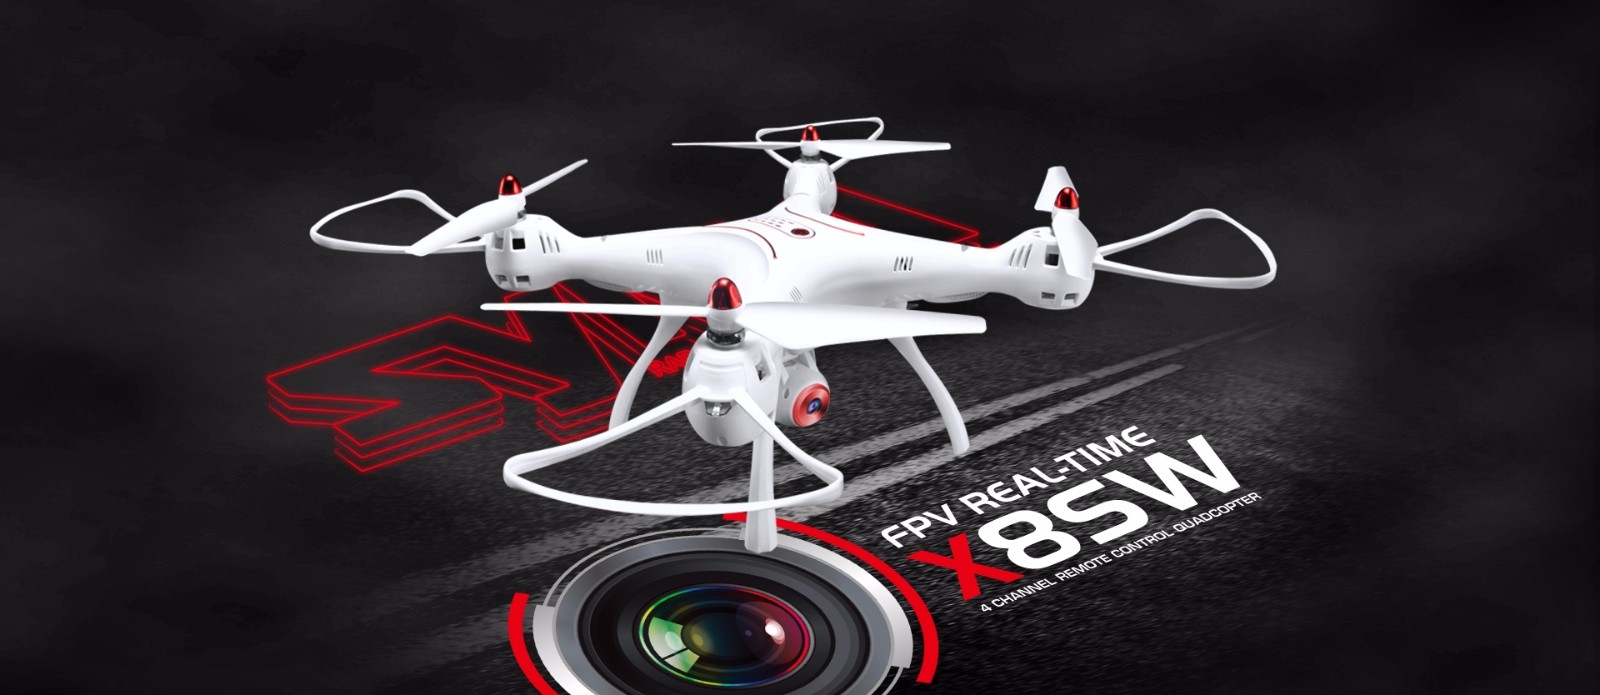 Syma X8SW WIFI FPV With 720P HD Camera 2.4G 4CH 6Axis Altitude Hold RC Quadcopter RTF